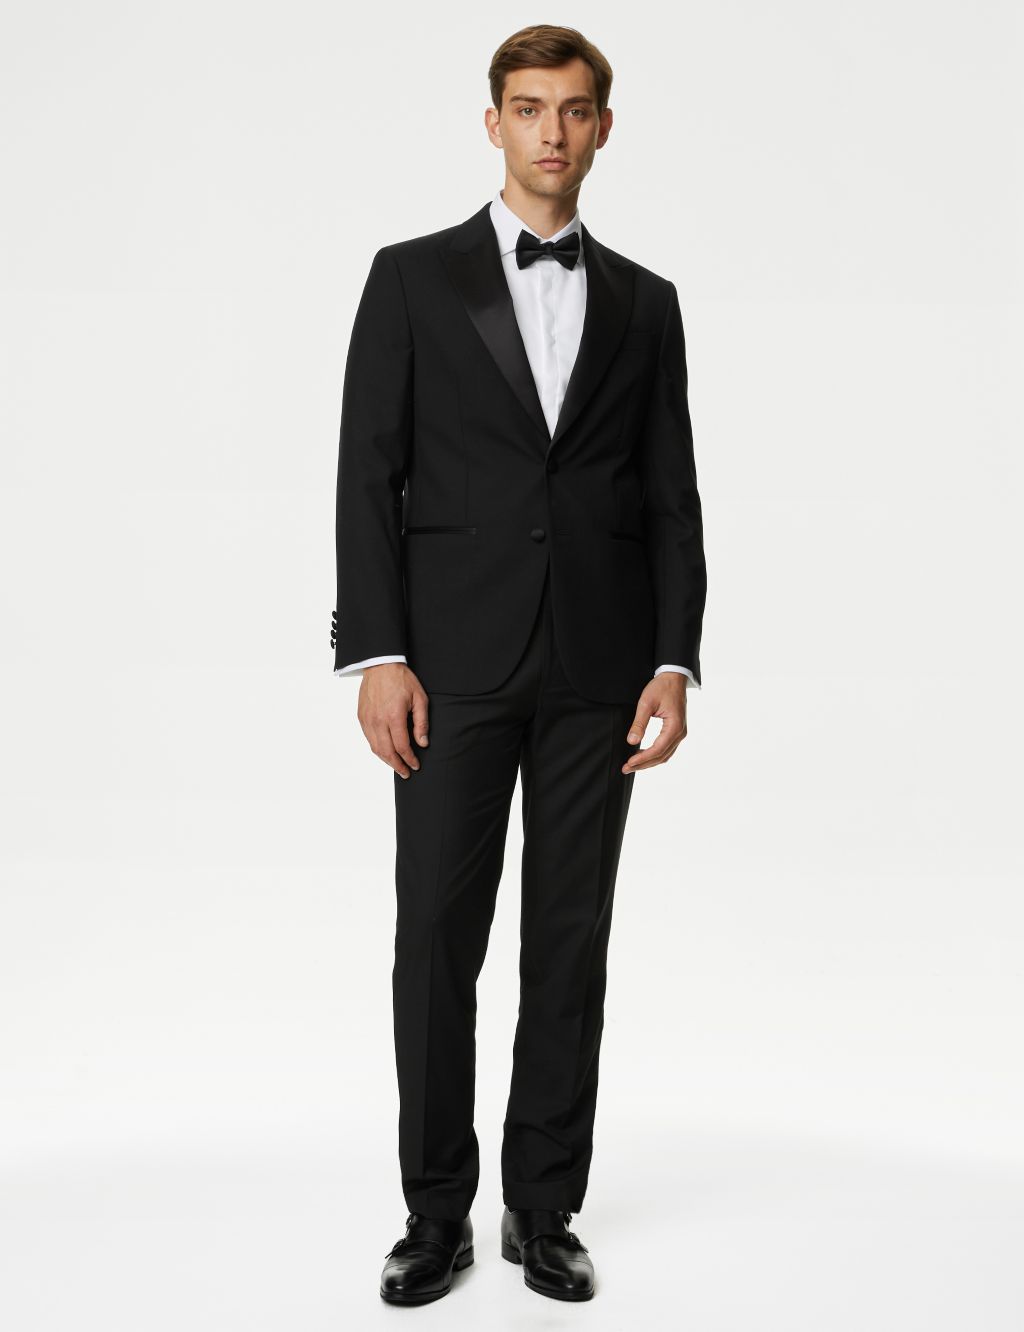 Tailored Fit Dinner Shirt with Bow Tie image 2